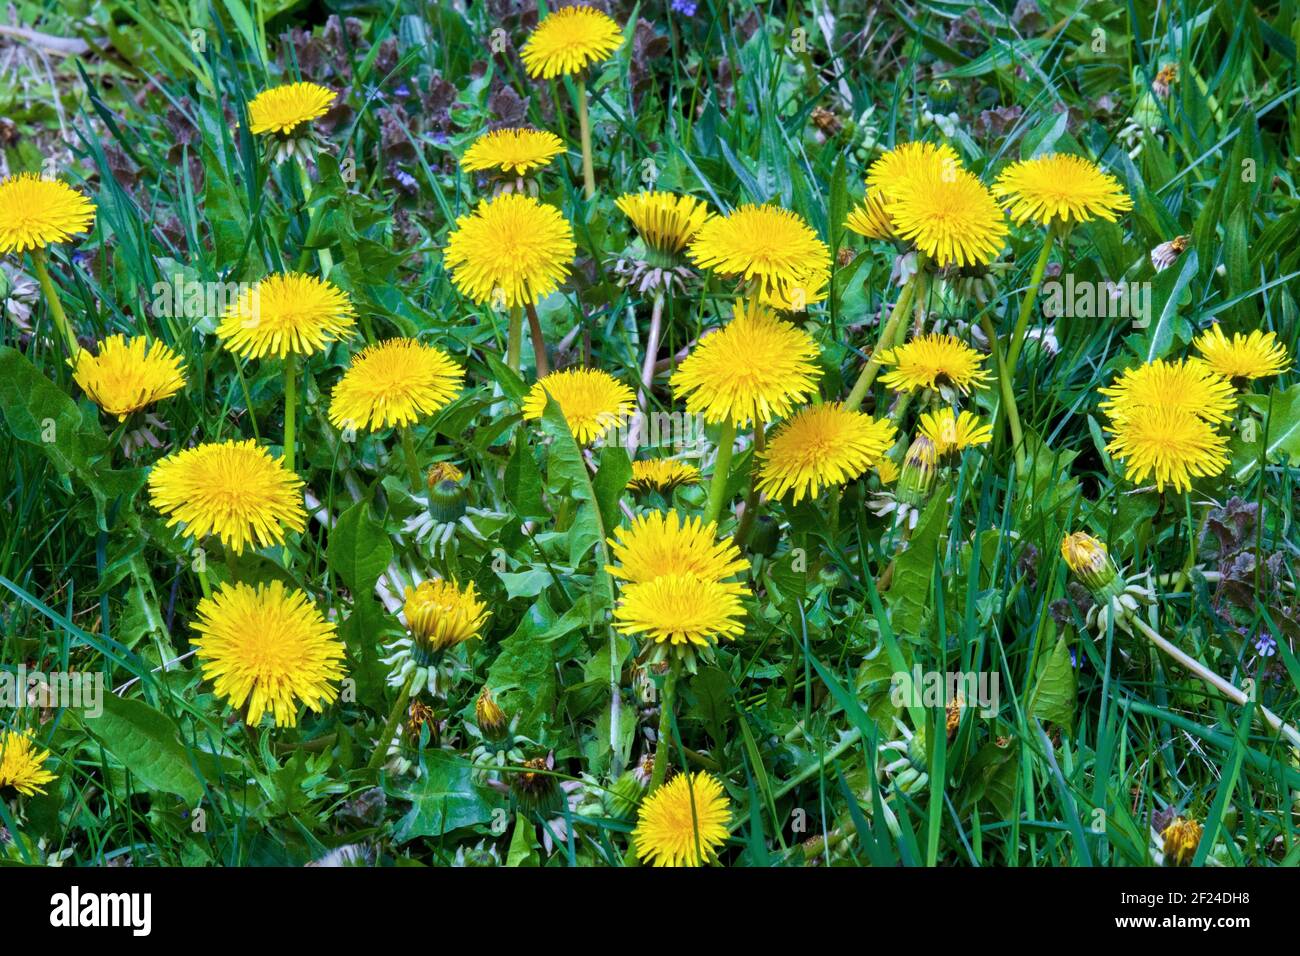 Common Dandelion blooming on in early spring on a lawn.  All parts of the plant are edible. Stock Photo